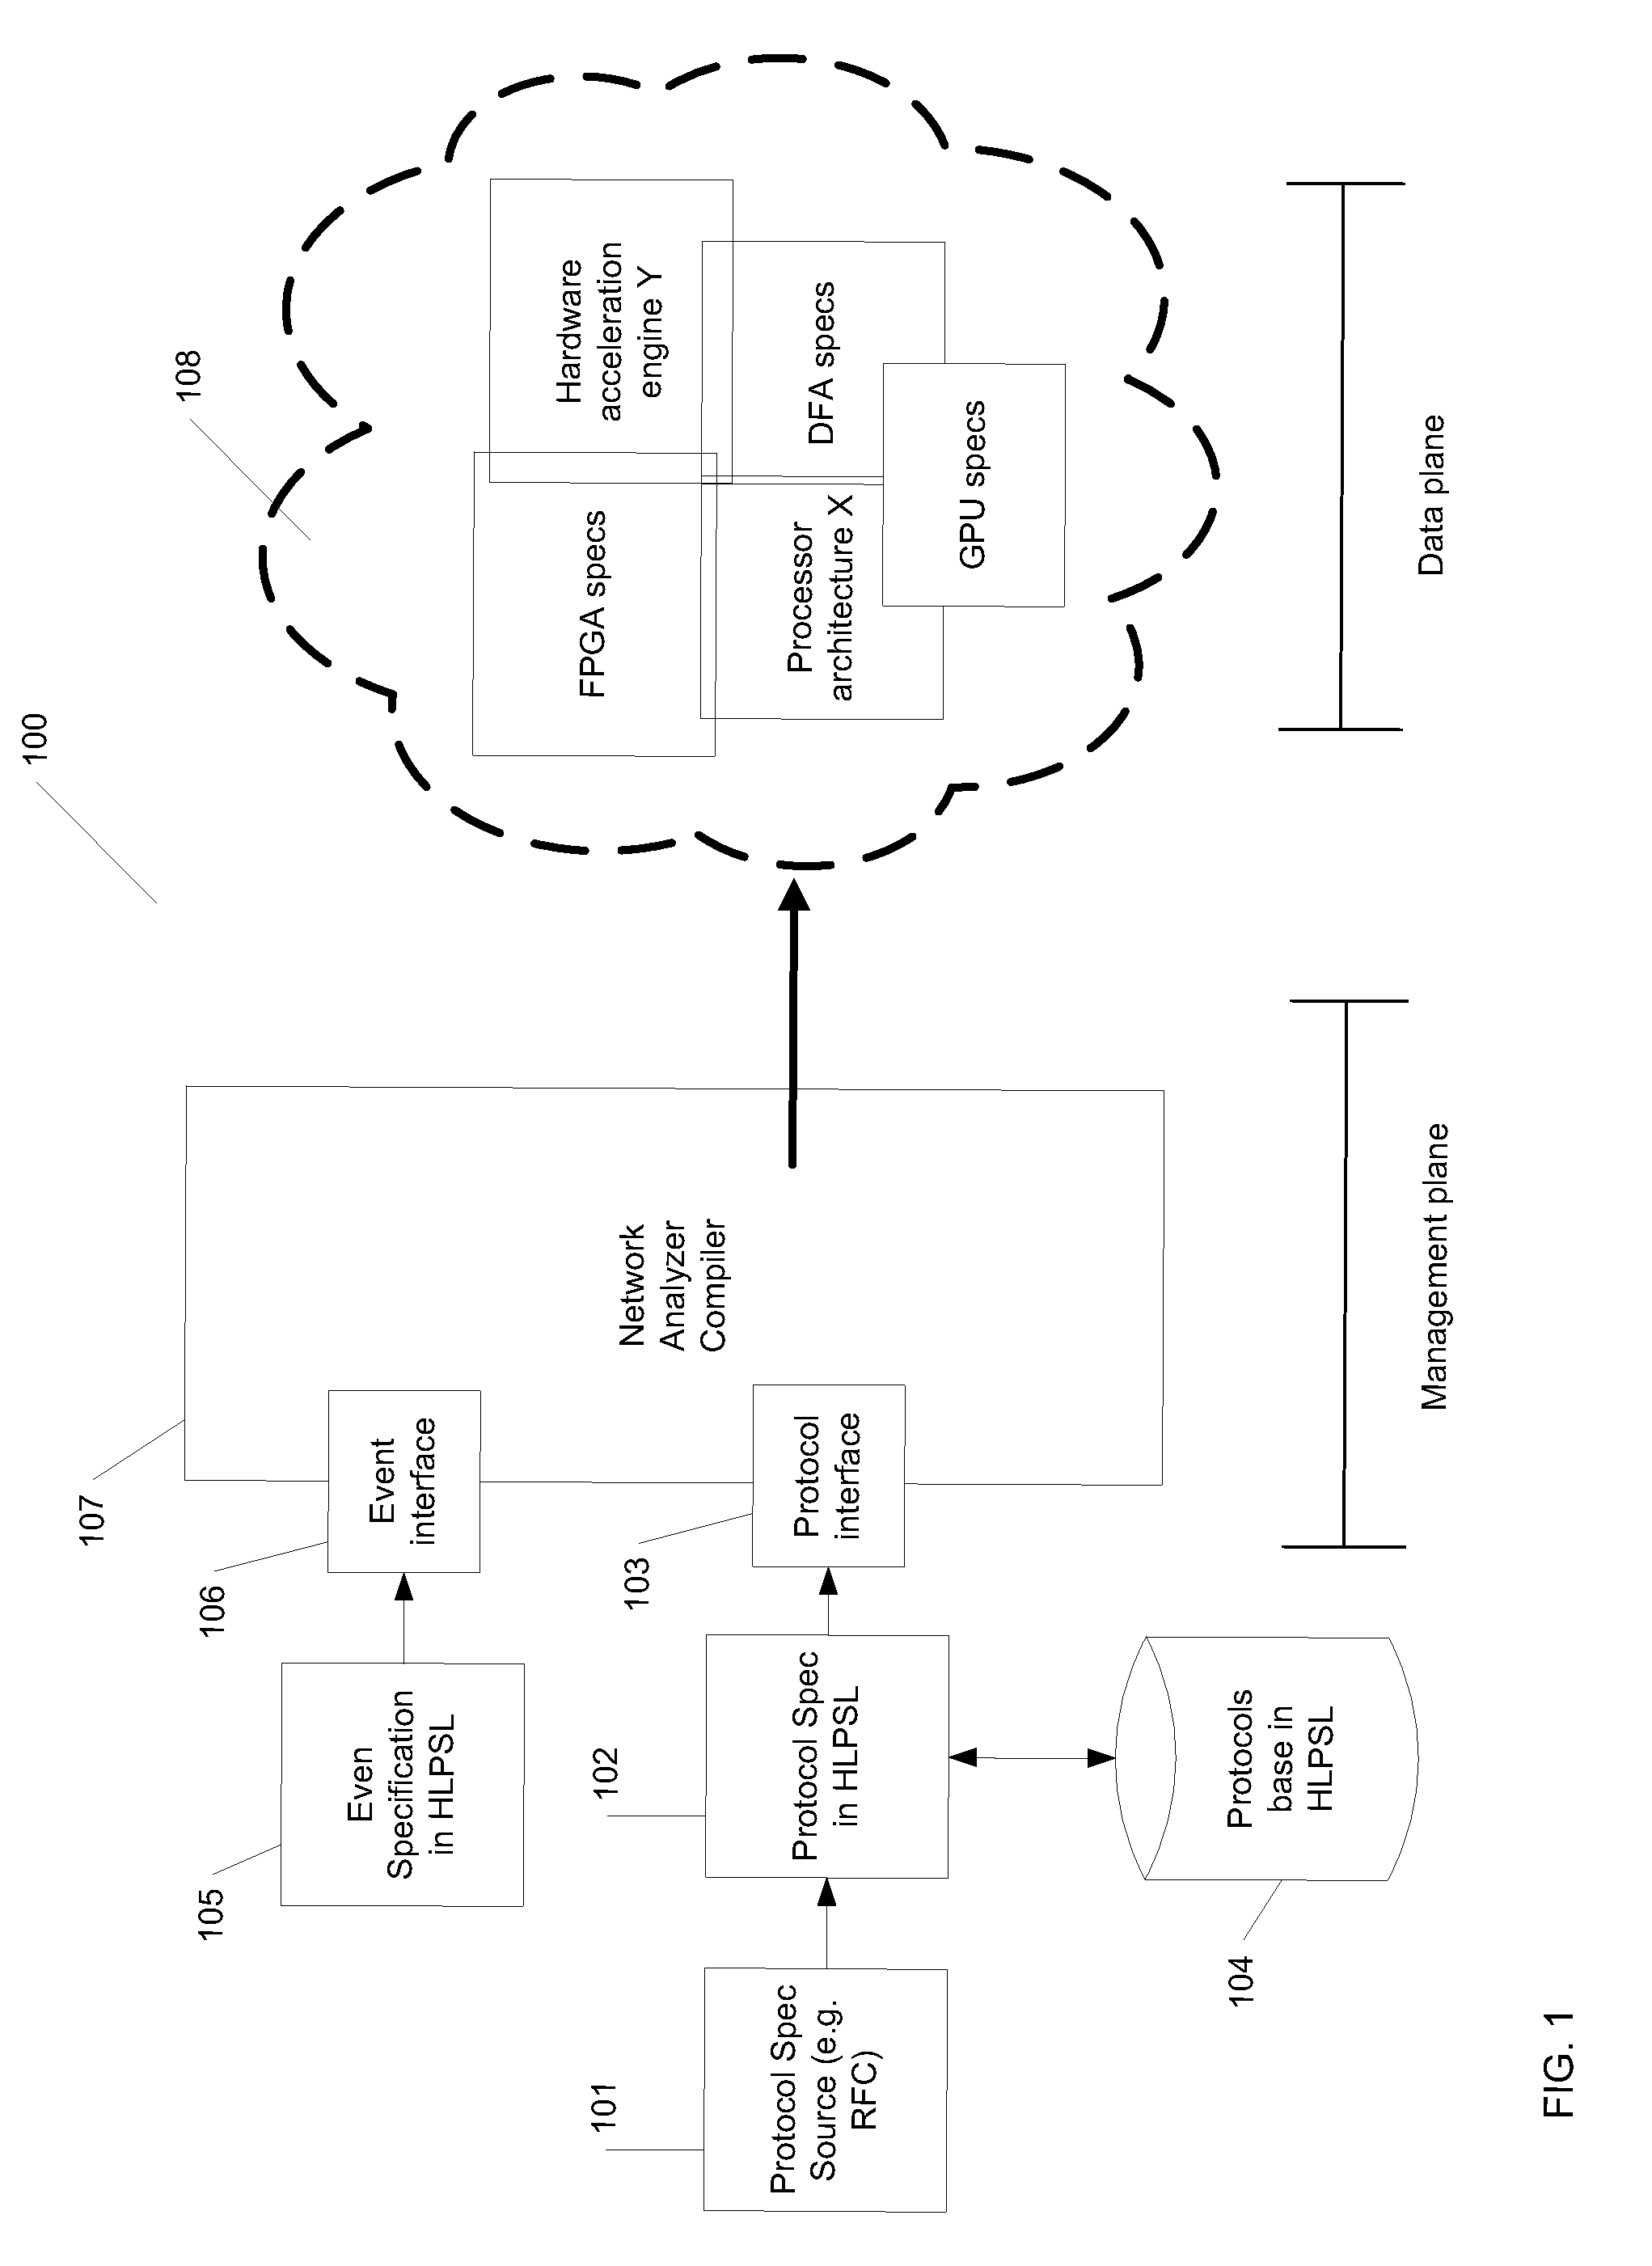 System, apparatus and methods to implement high-speed network analyzers